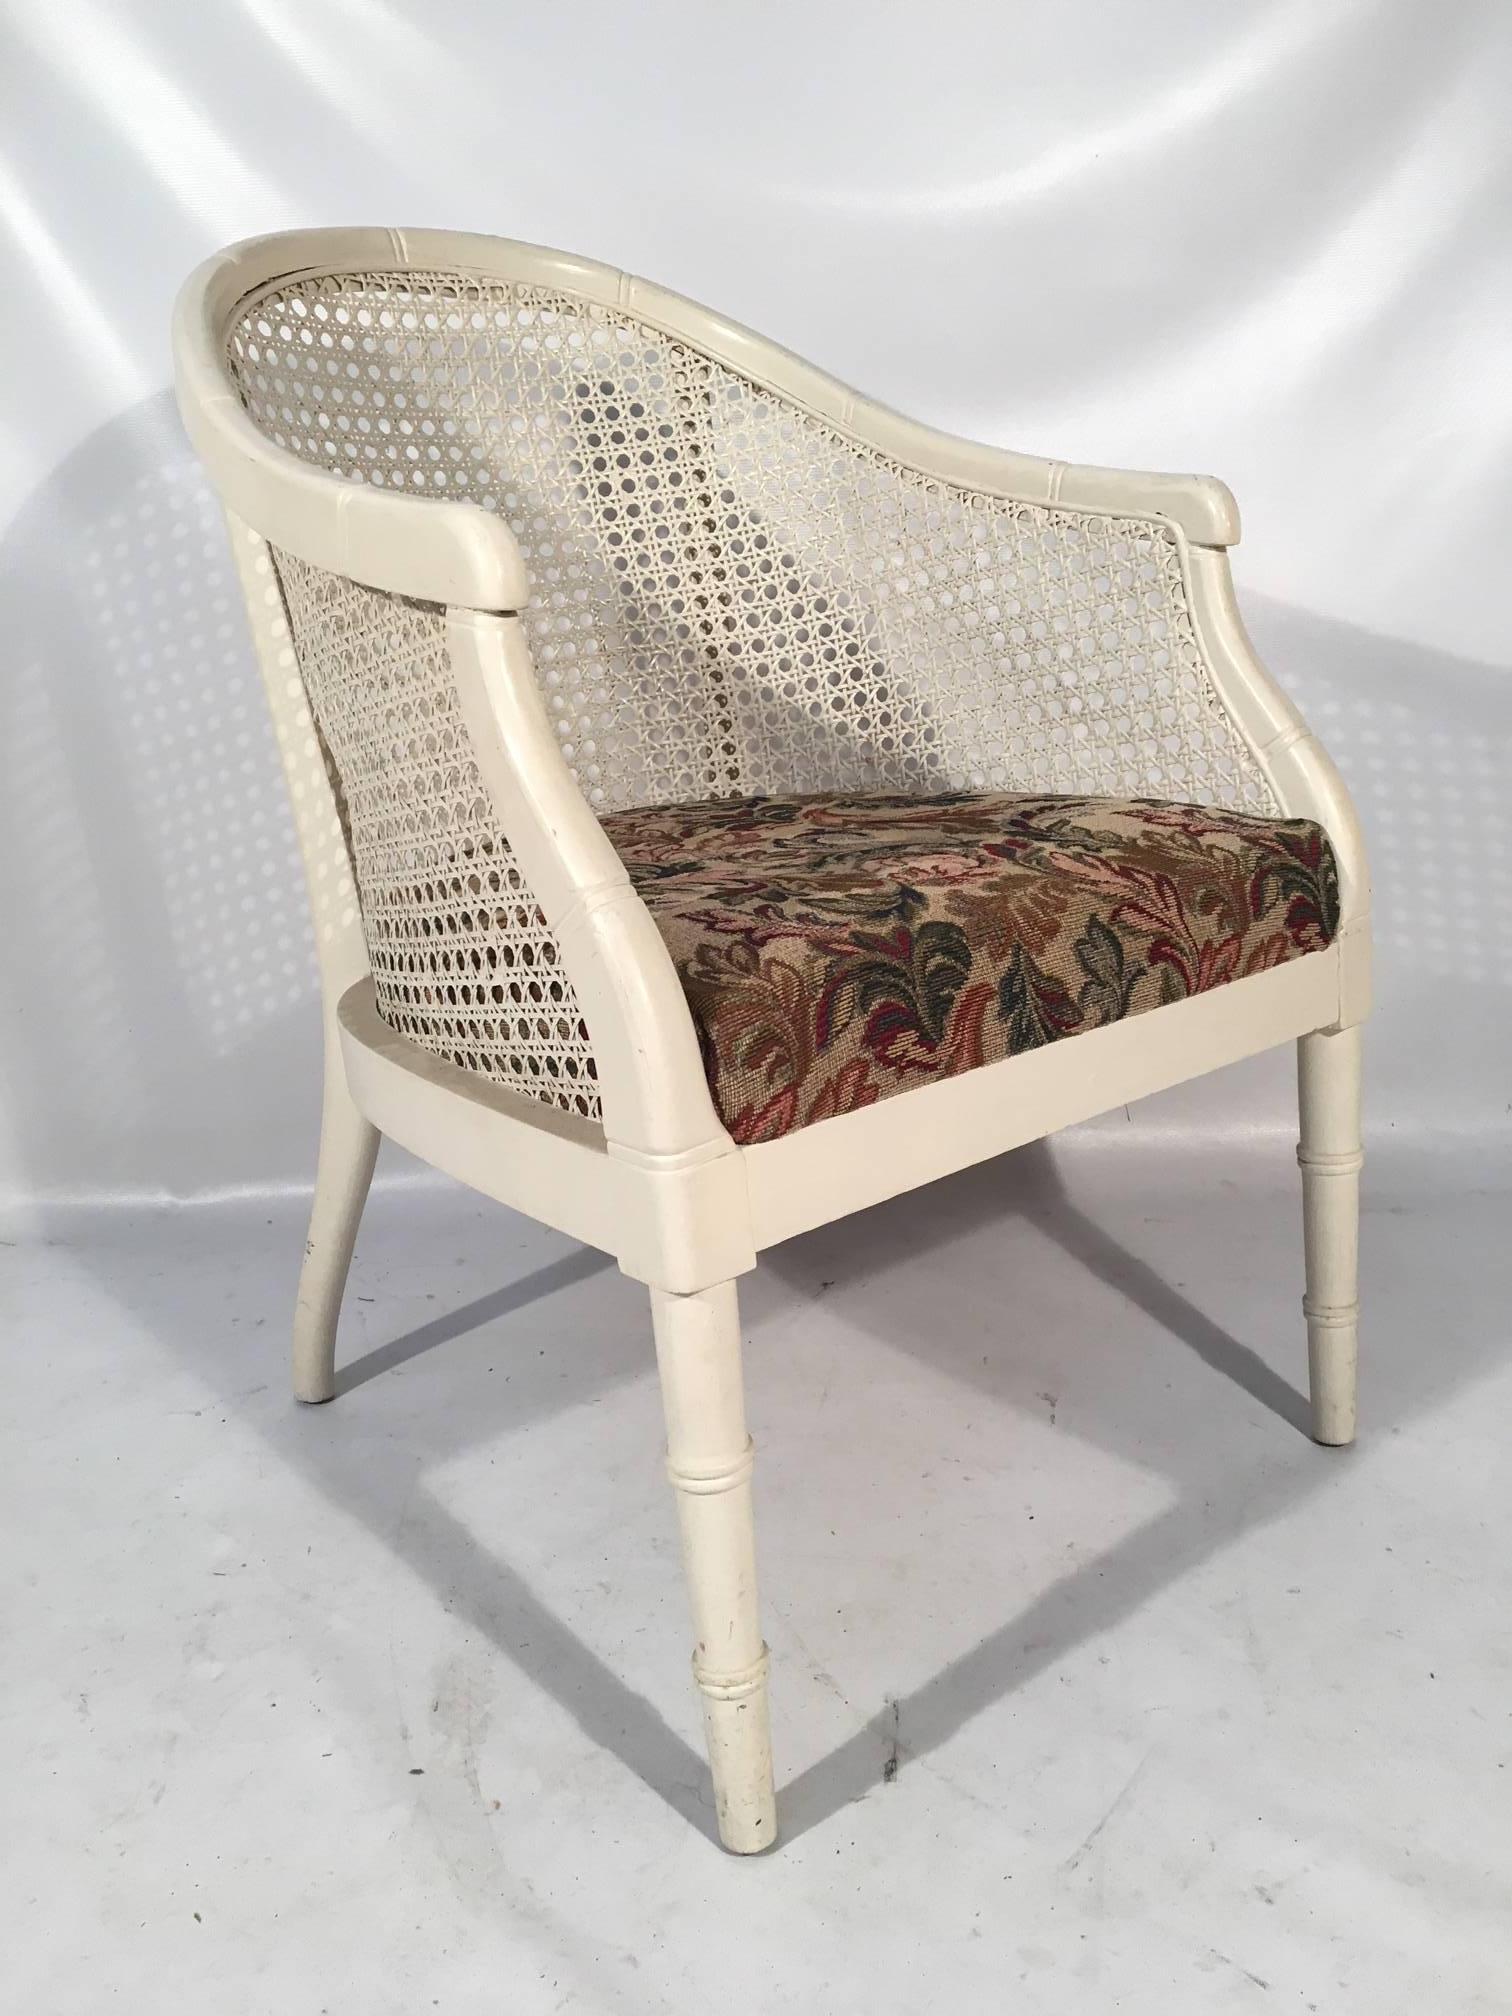 Set of four midcentury caned barrel chairs in excellent vintage condition. Caning in very good condition with only minor wear consistent with age. Off-white finish in very good condition. Structurally sound. Fabric in near perfect condition.